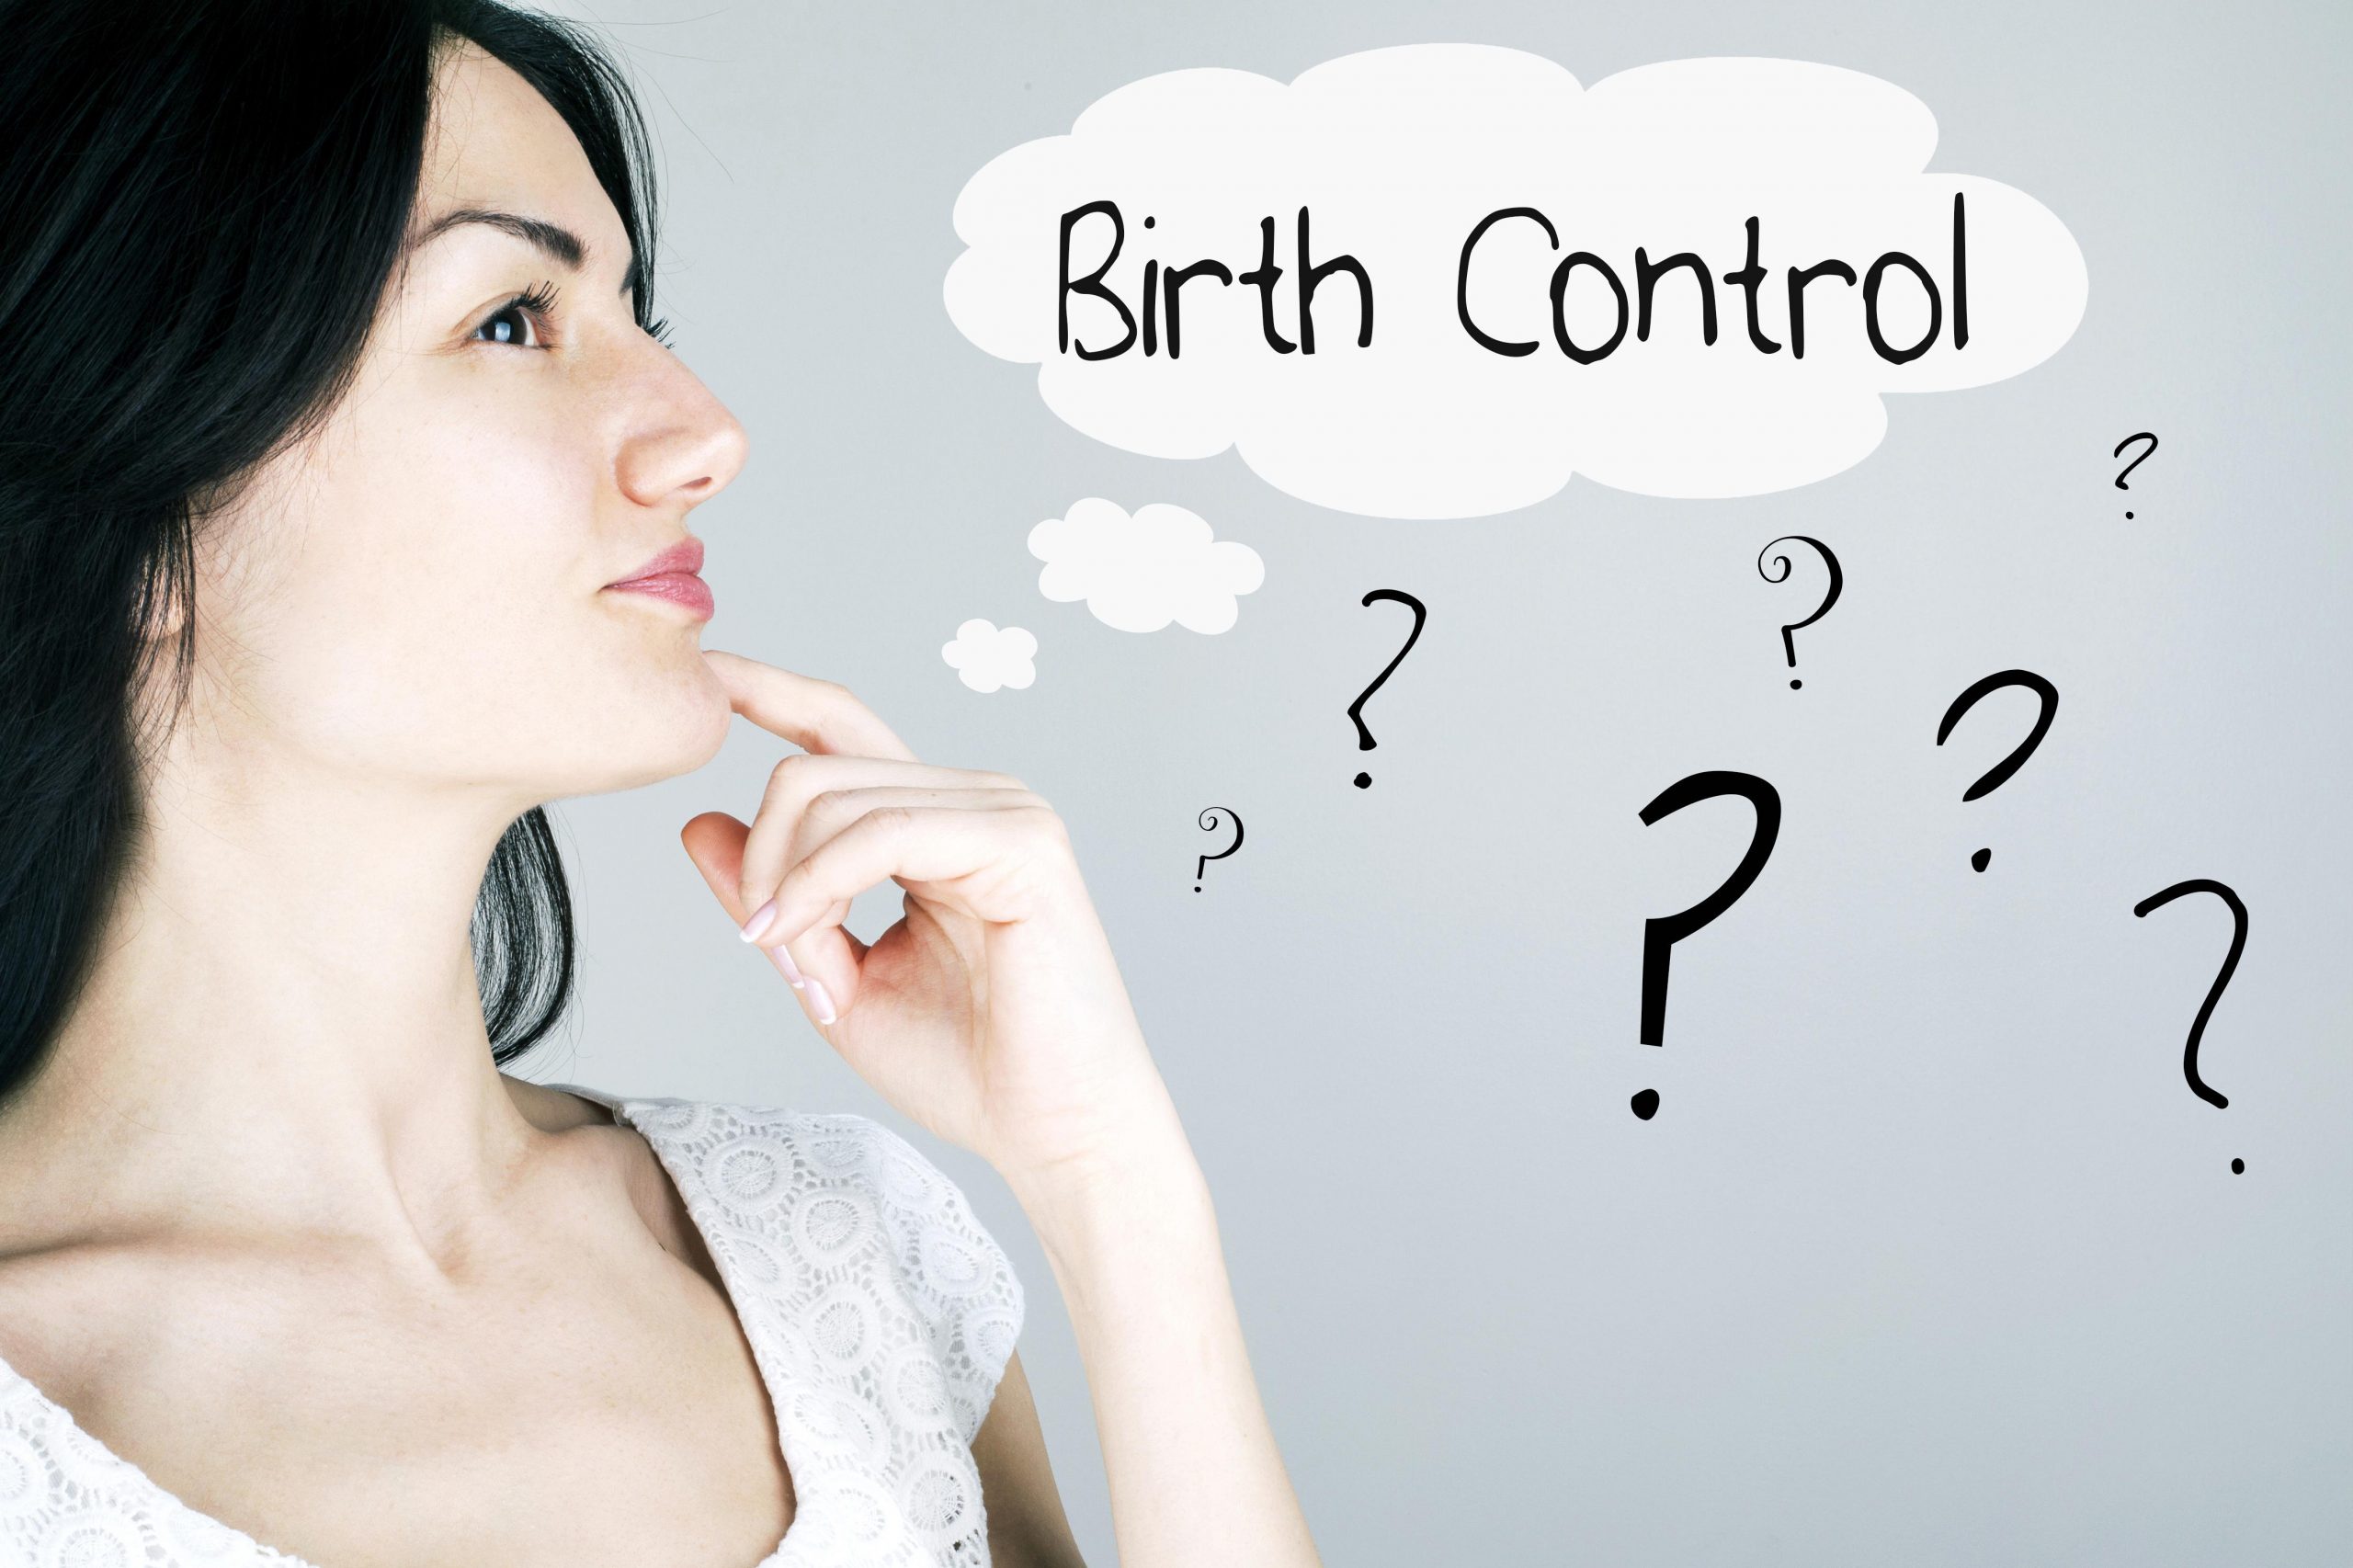 lady with finger on chin thinking about birth control